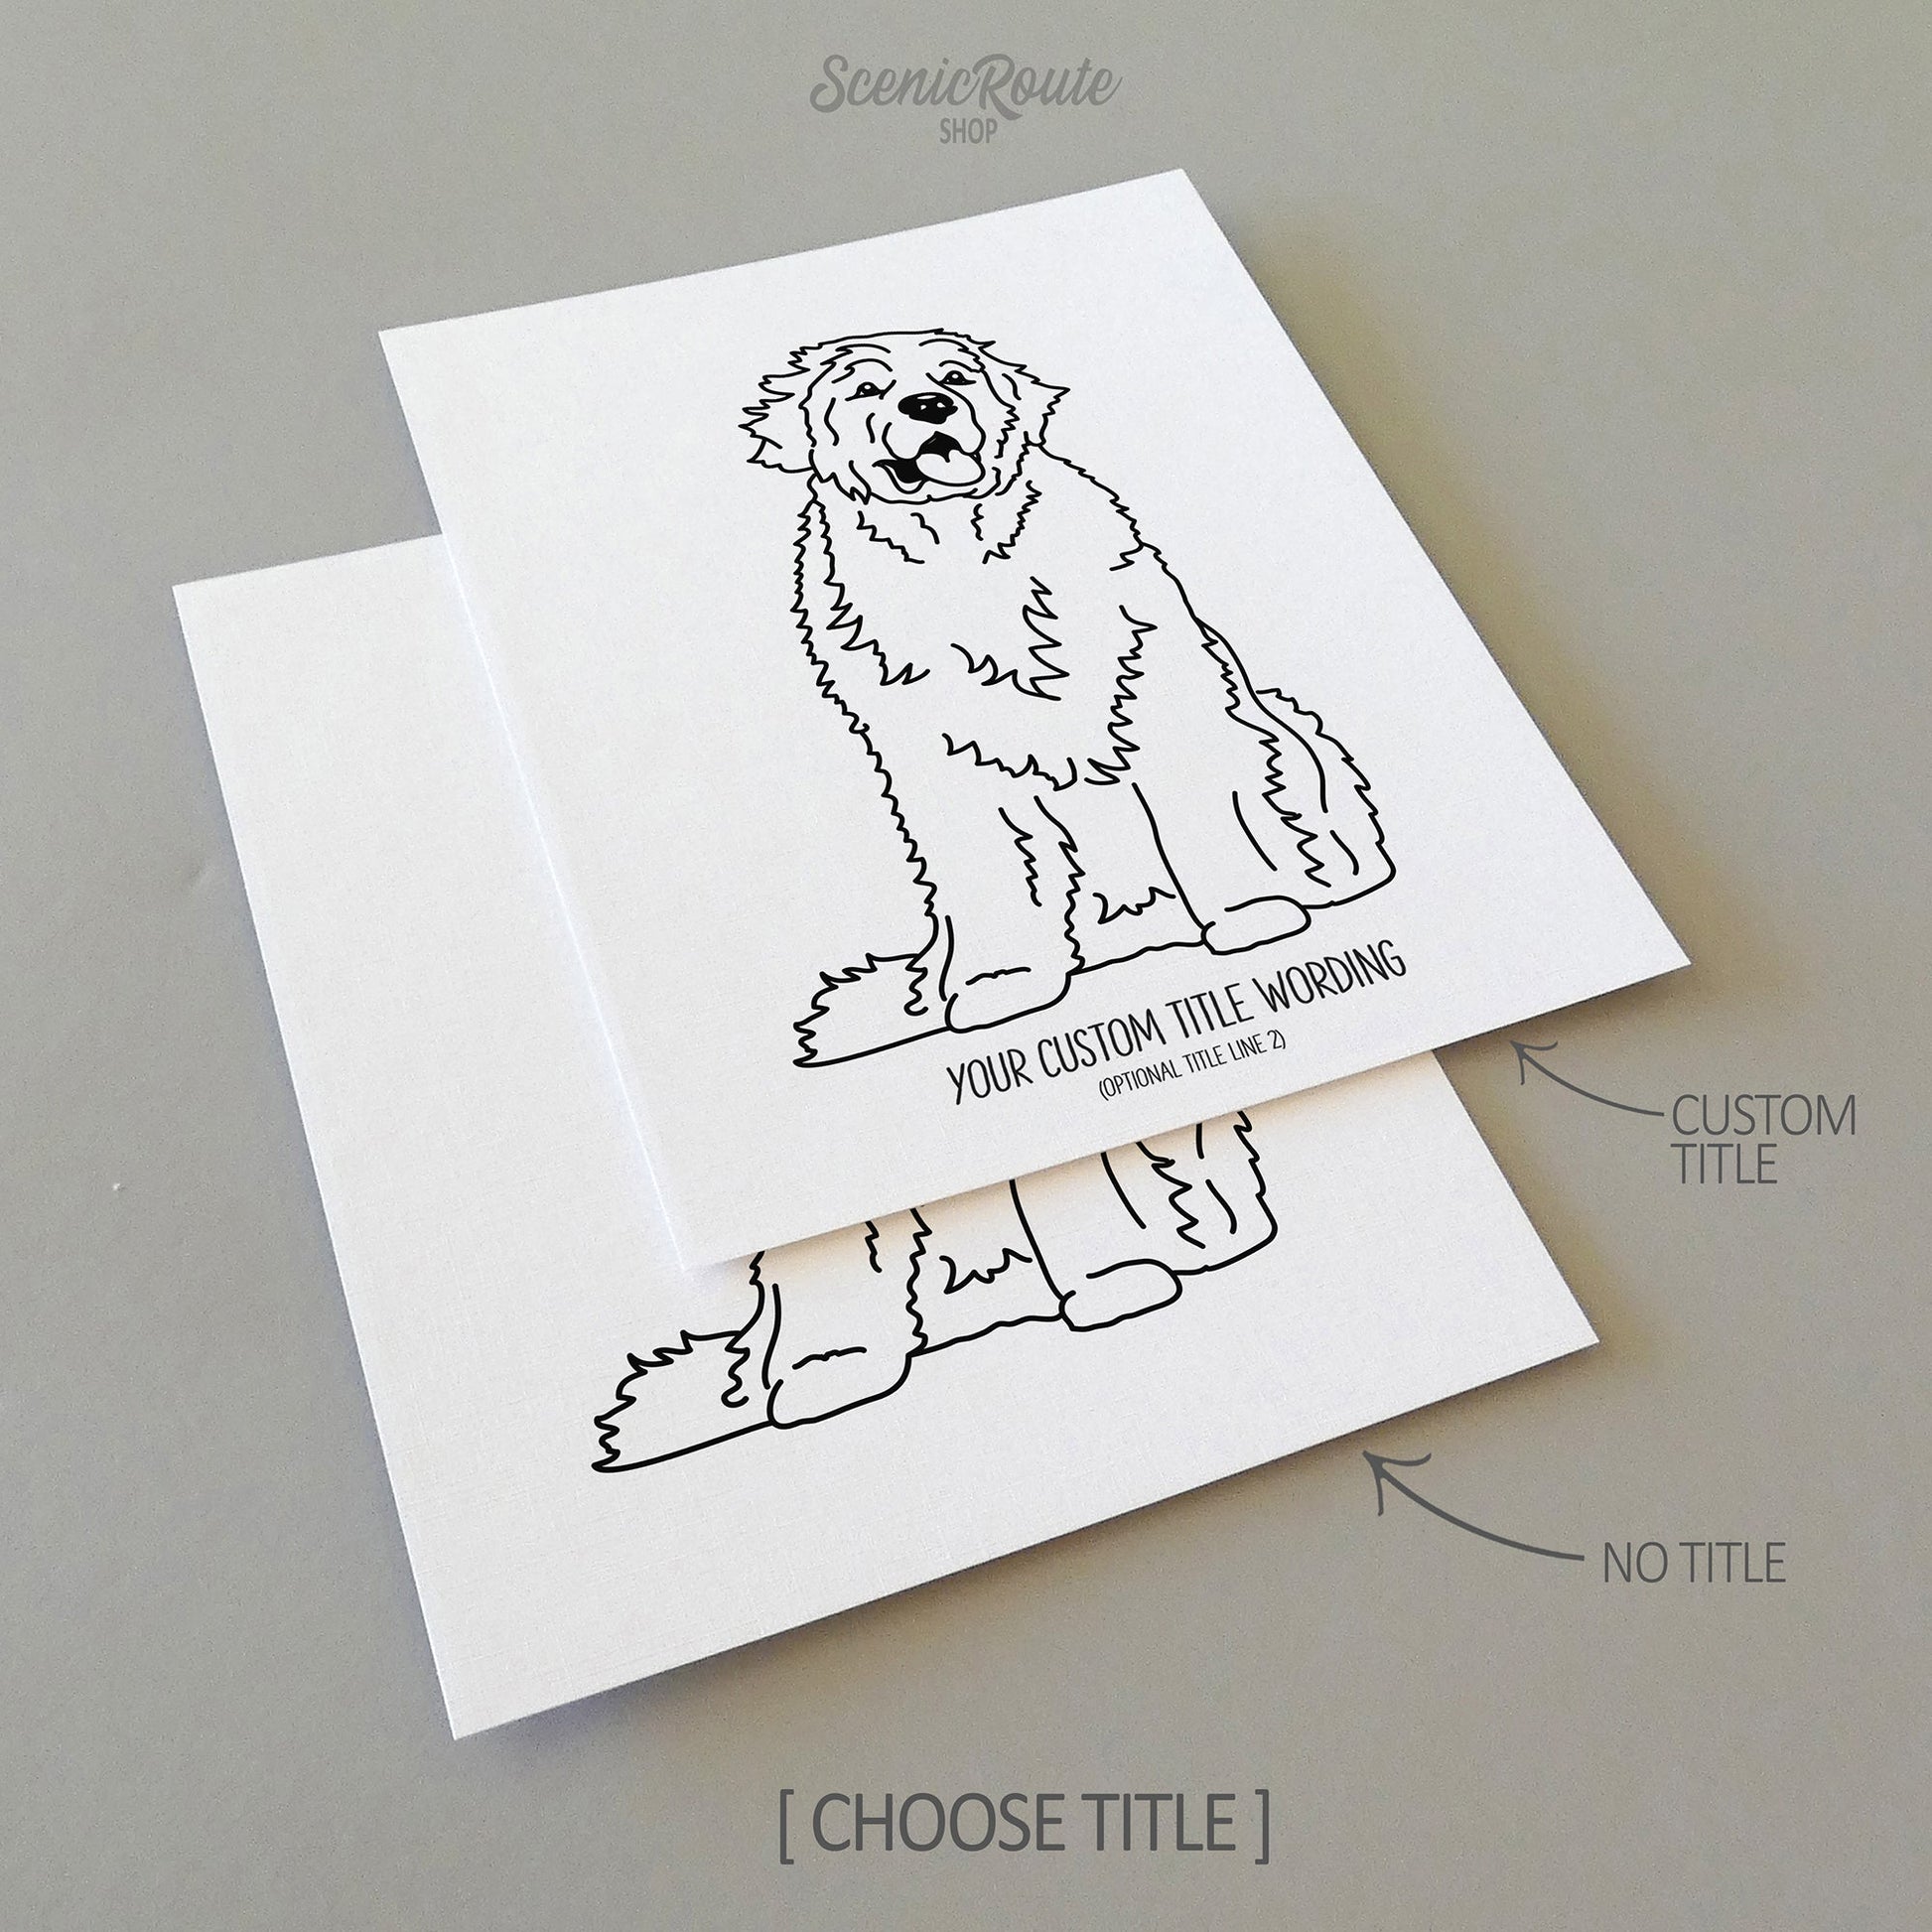 Two line art drawings of a Newfoundland dog on white linen paper with a gray background.  The pieces are shown with “No Title” and “Custom Title” options for the available art print options.